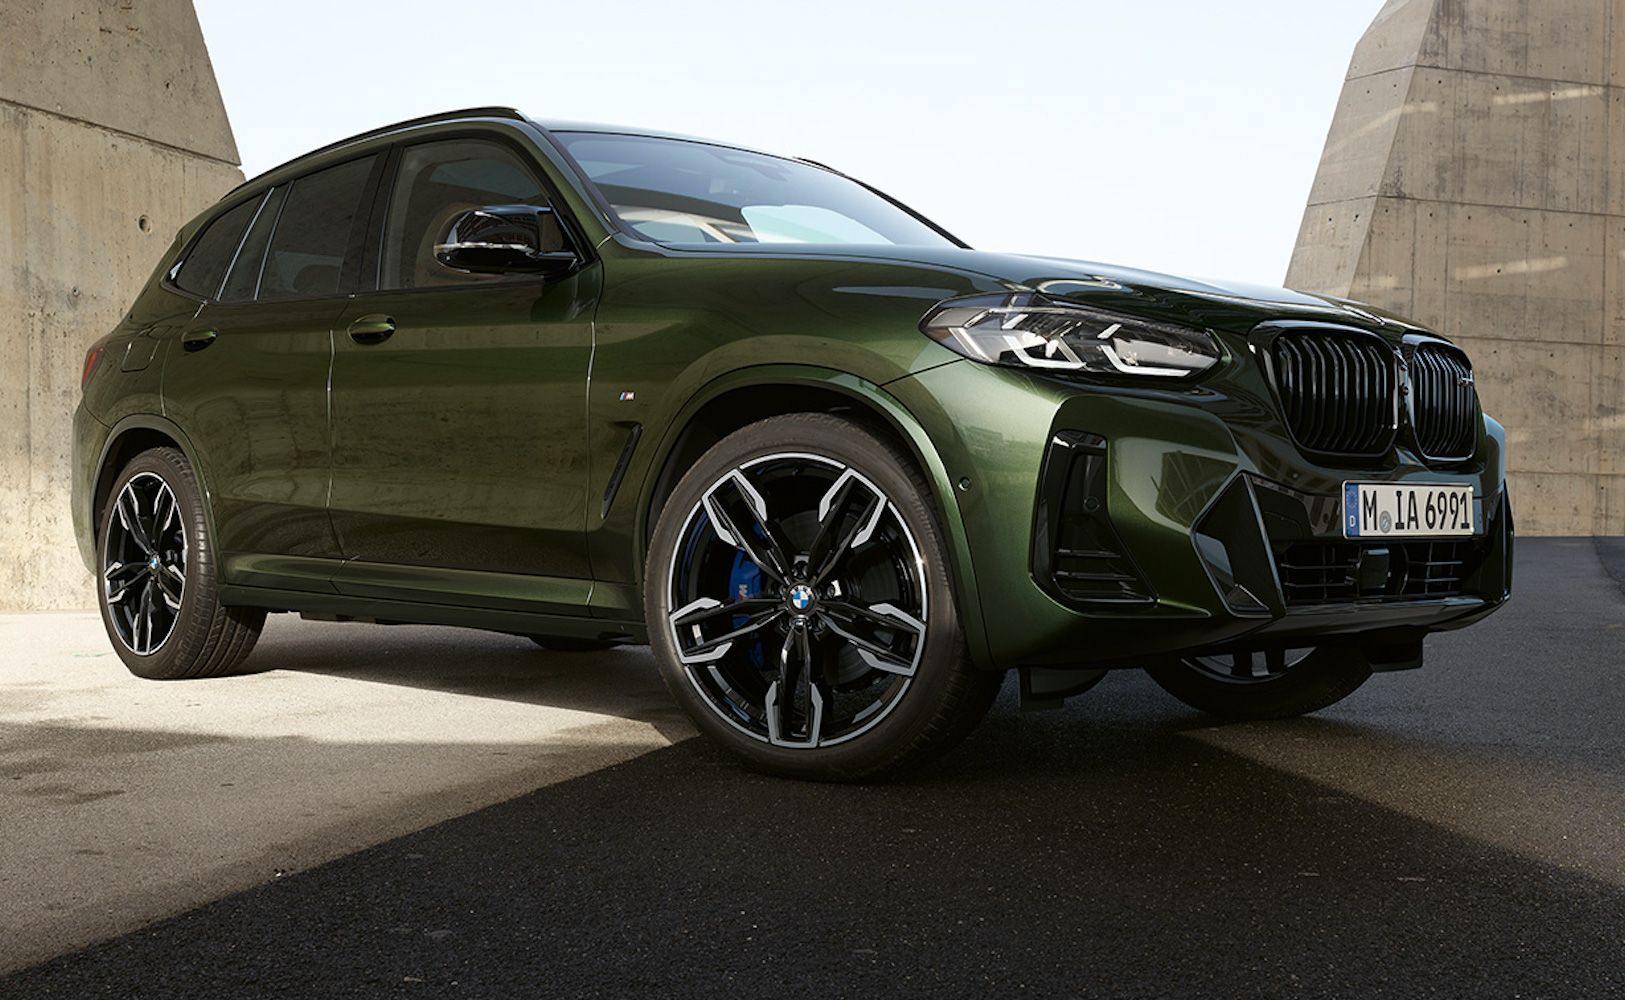 A look at the side of the 2022 BMW X3 M40i SUV in green. Read about our test drive in this full review of the luxury vehicle.